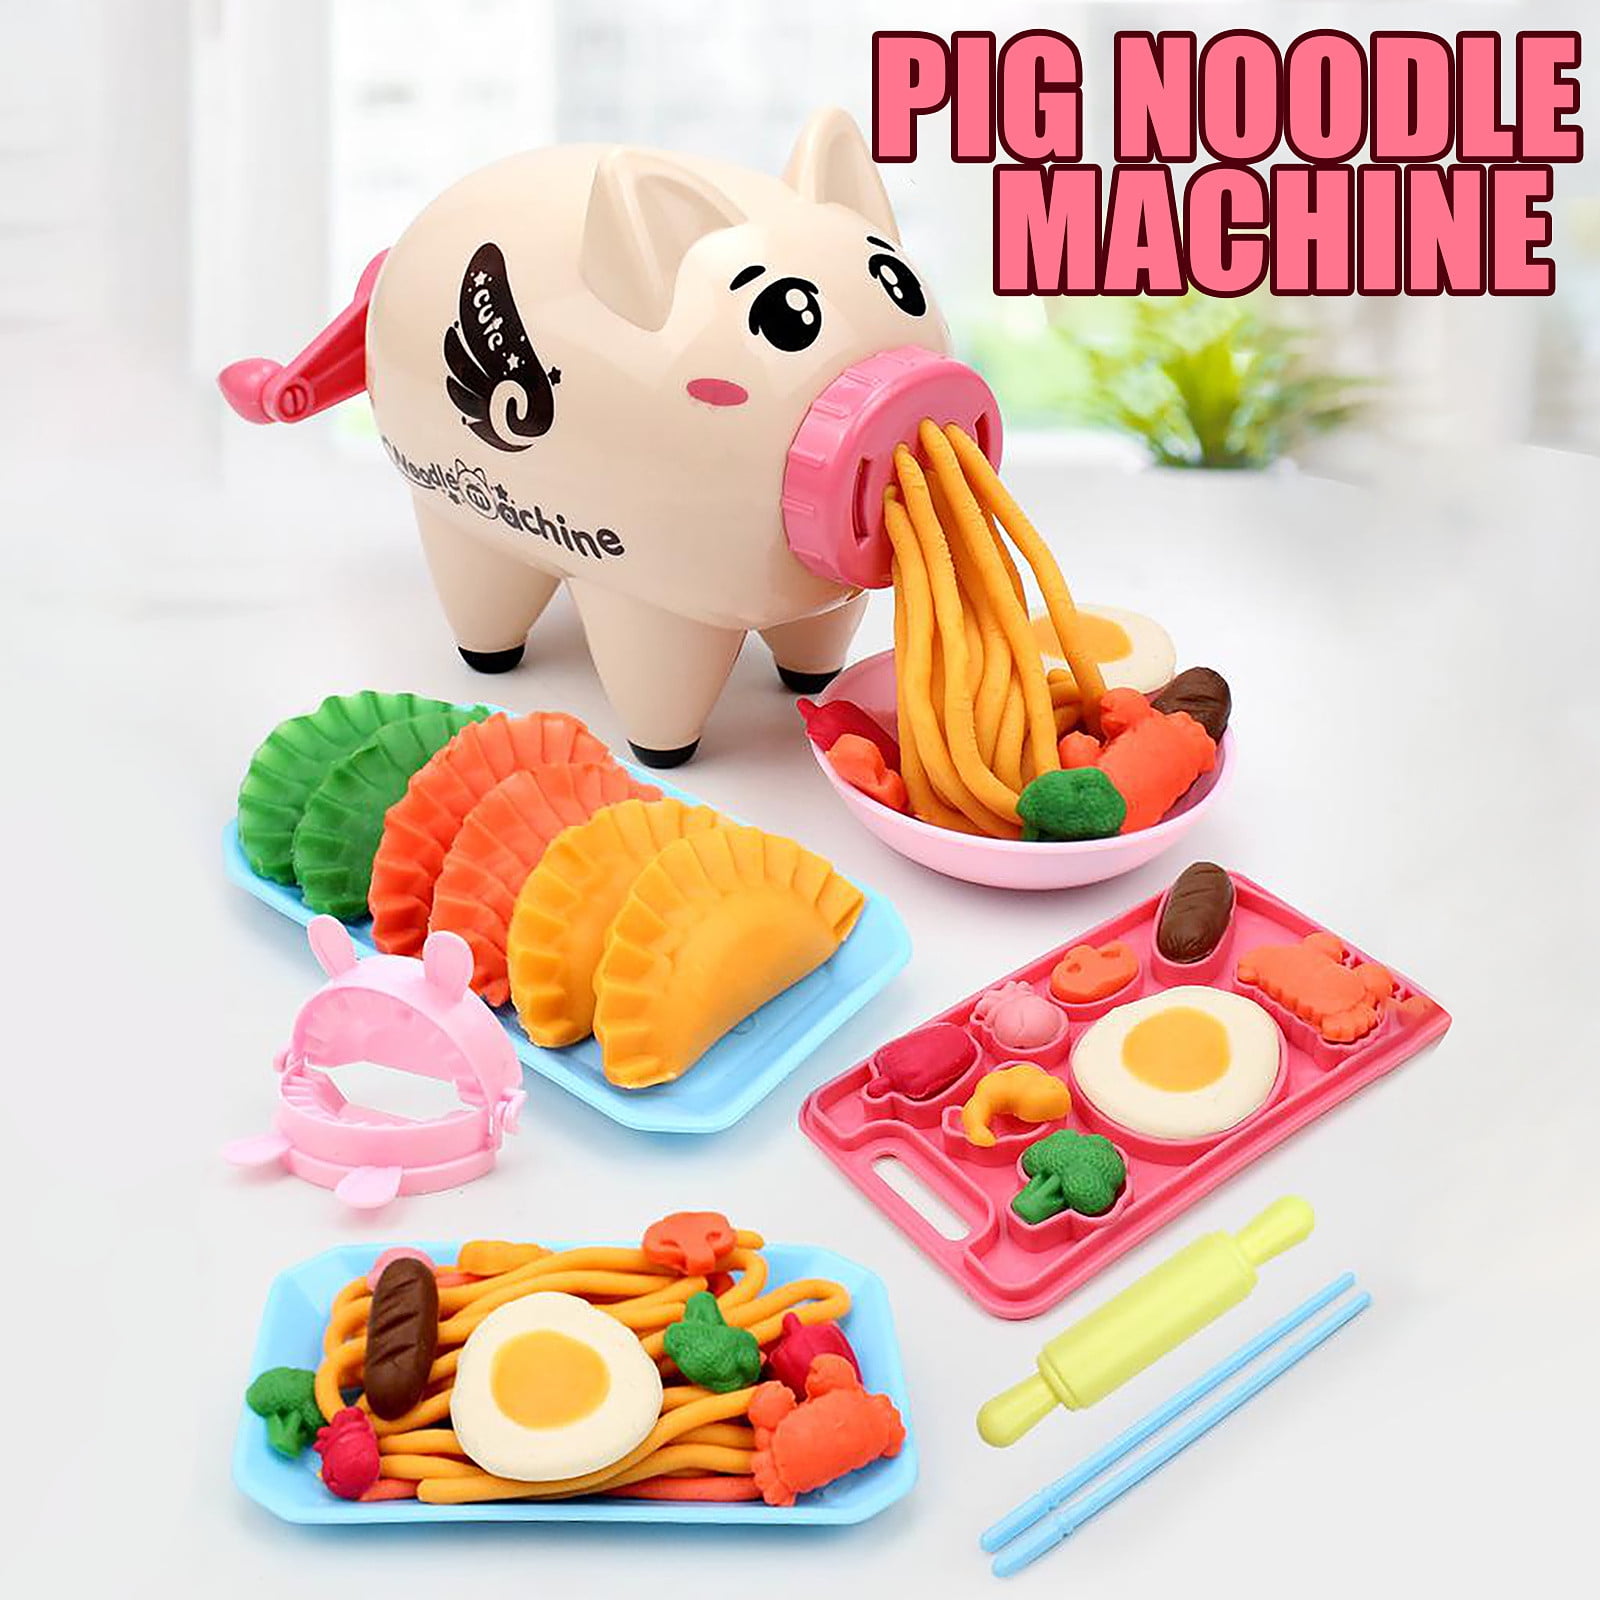 Playdough Kitchen Creations Noodles Educational Playsets Noodle Machine For  Girls Creation Interesting Playdoh Tools For Toddler - AliExpress